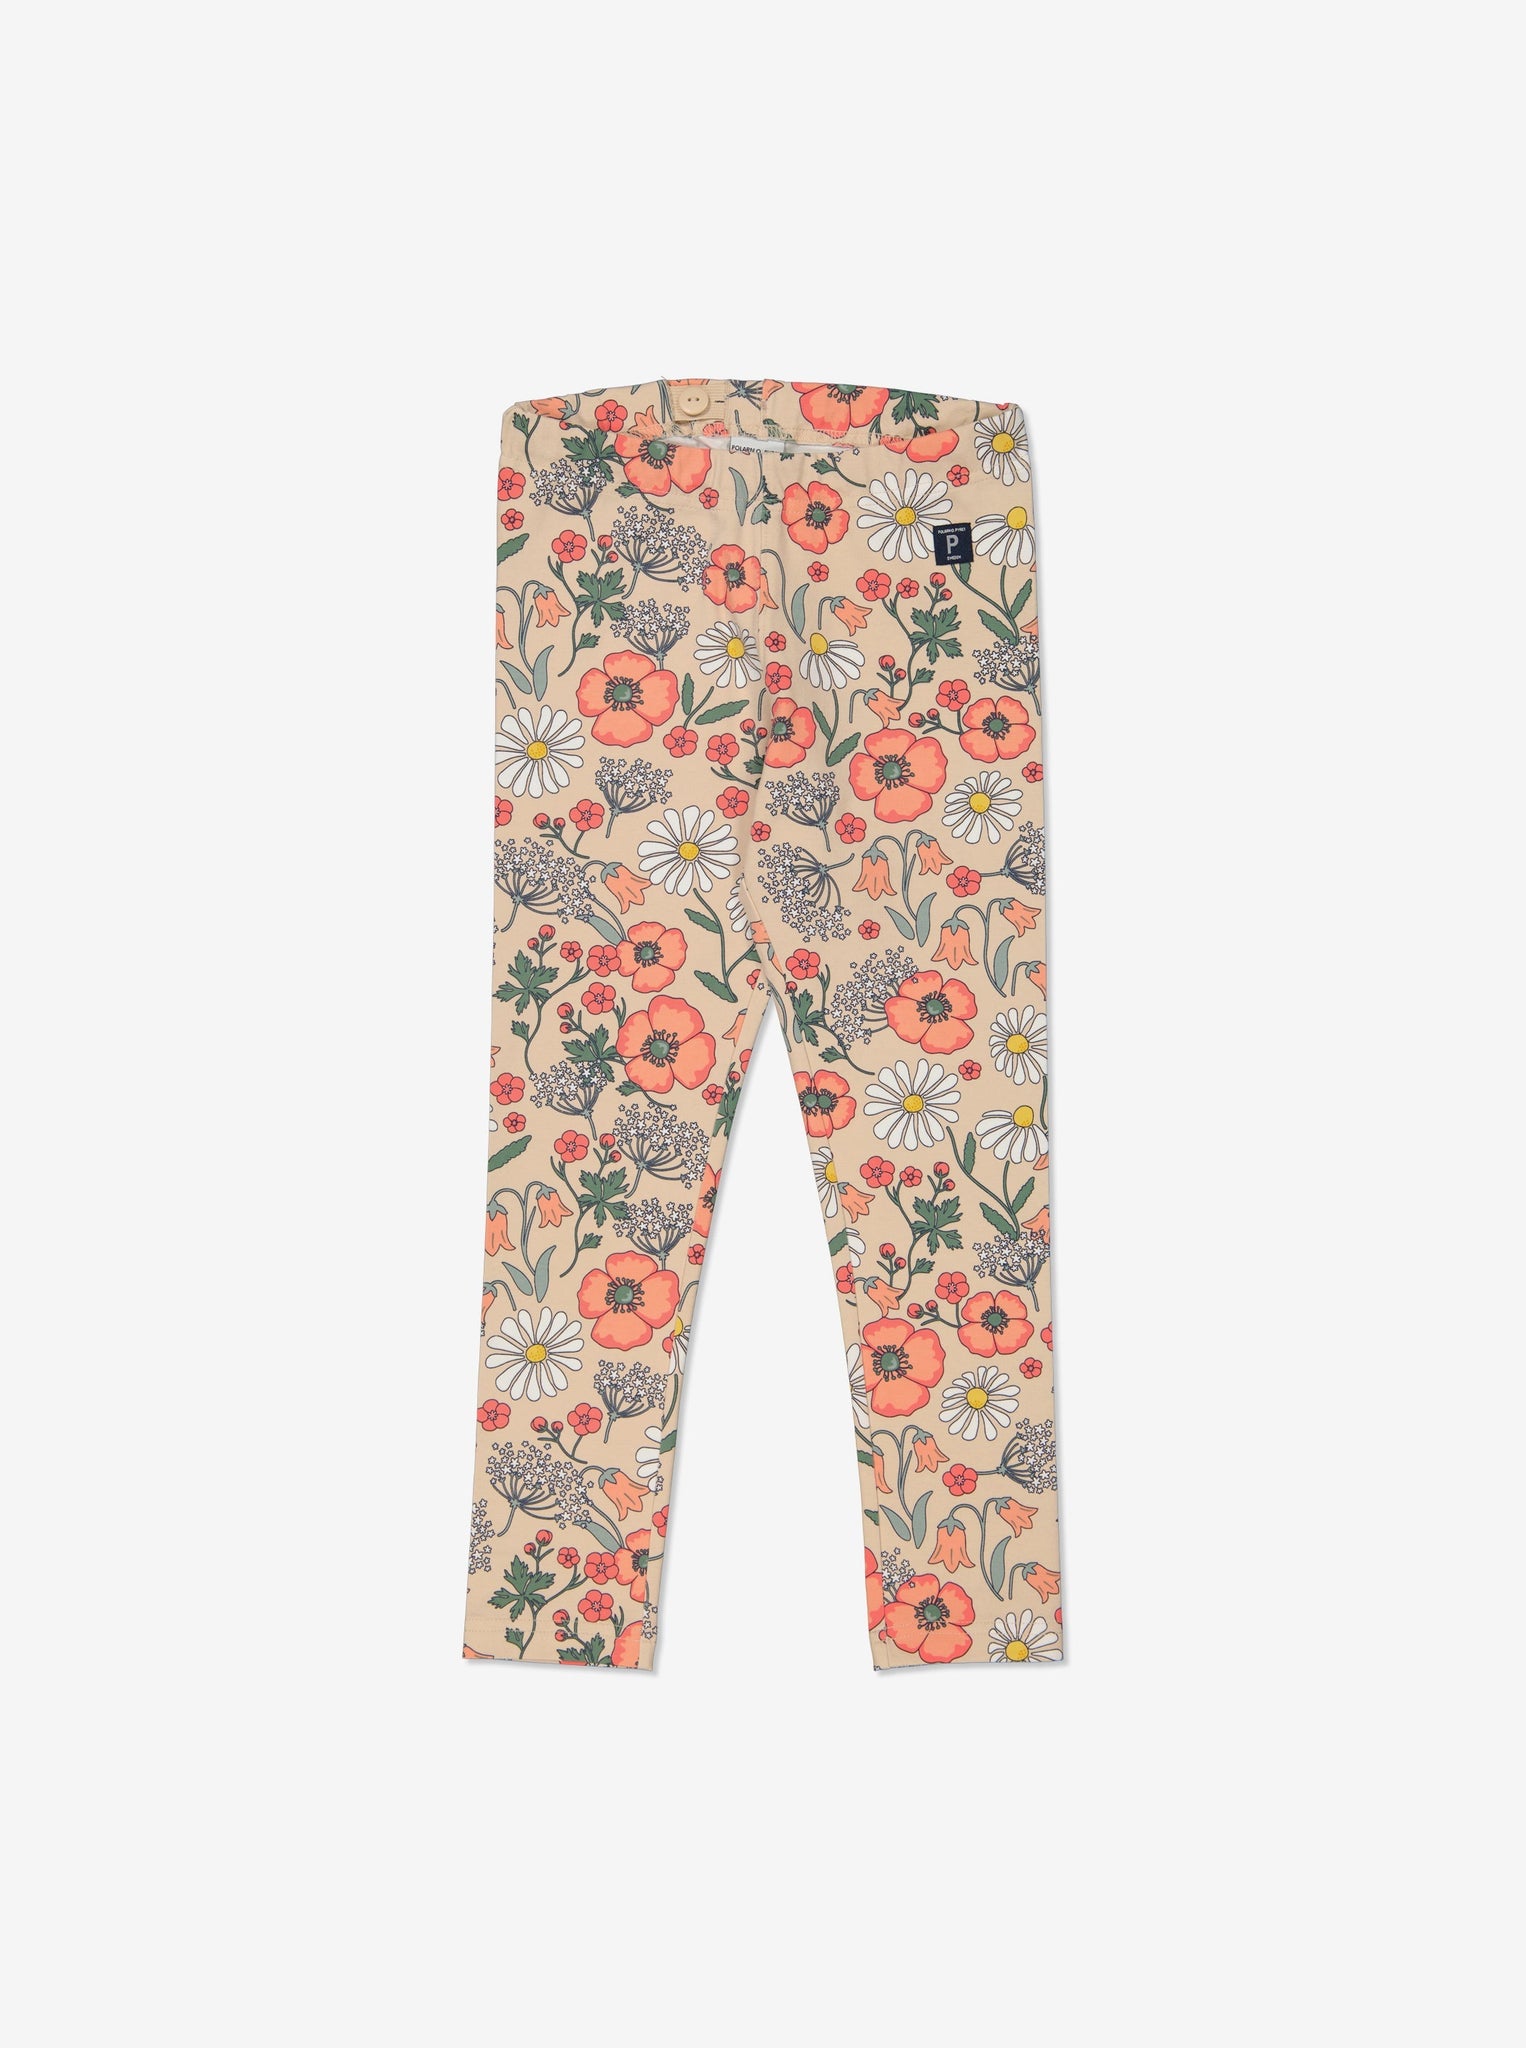 Organic Cotton Floral Girls Leggings from Polarn O. Pyret Kidswear. Ethically made and sustainably sourced materials.